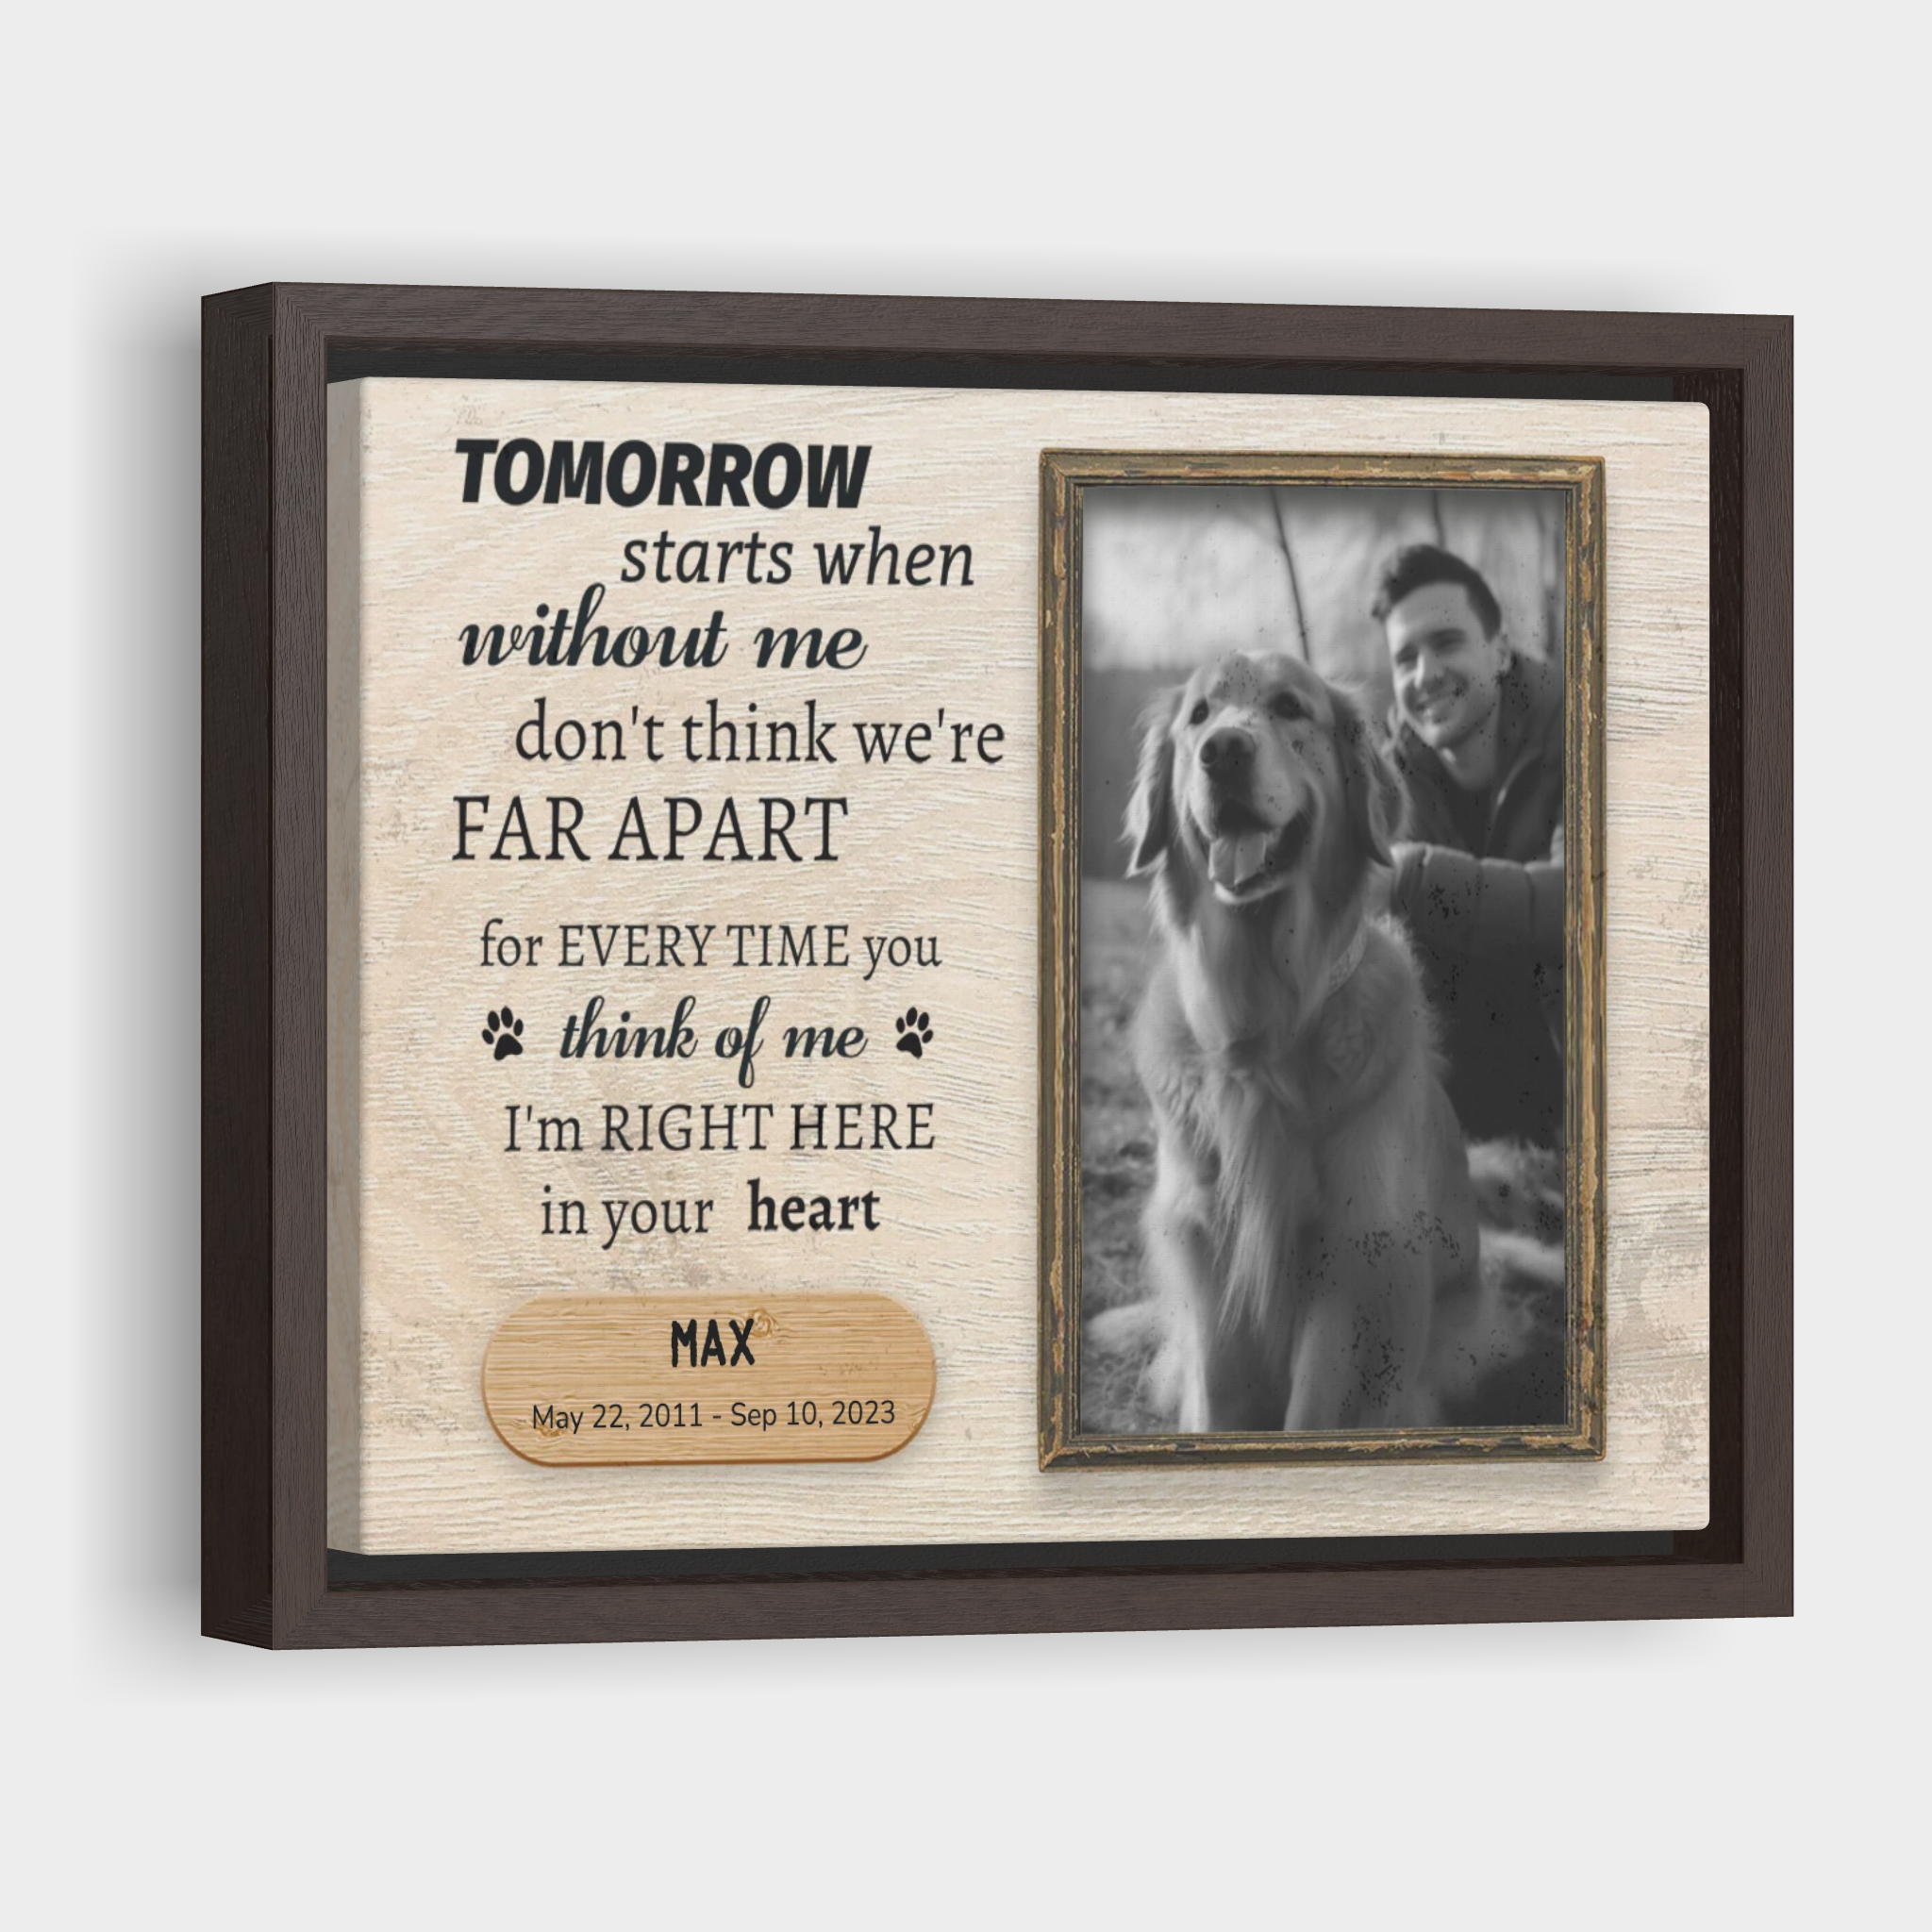 Tomorrow Start Without Me, Hang and Place - Personalized Canvas Print Pet Memorial